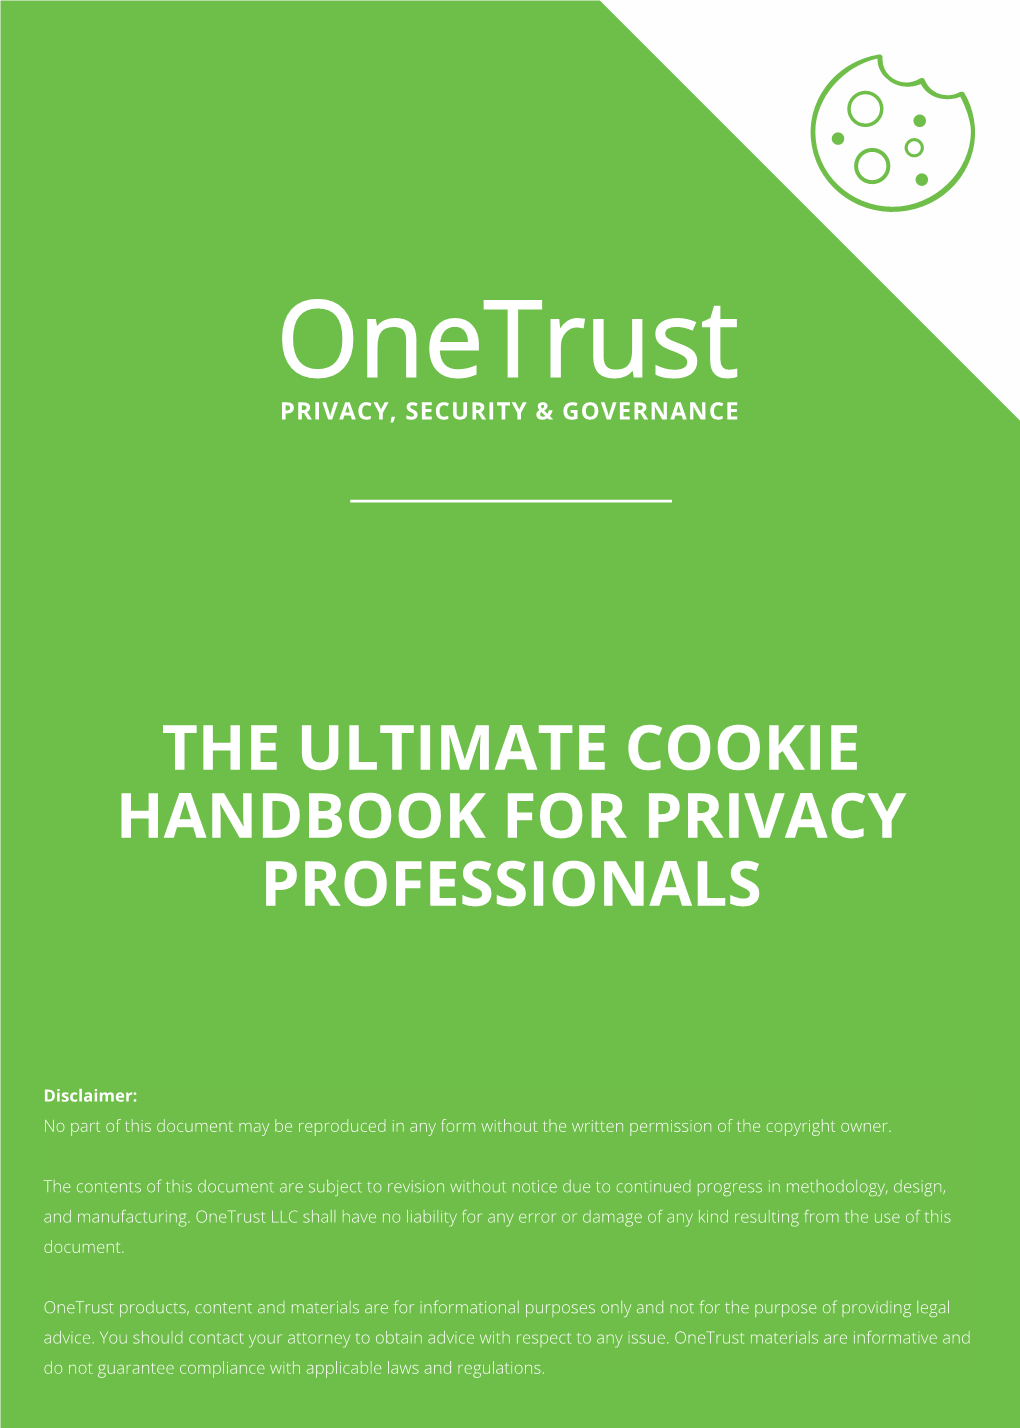 The Ultimate Cookie Handbook for Privacy Professionals